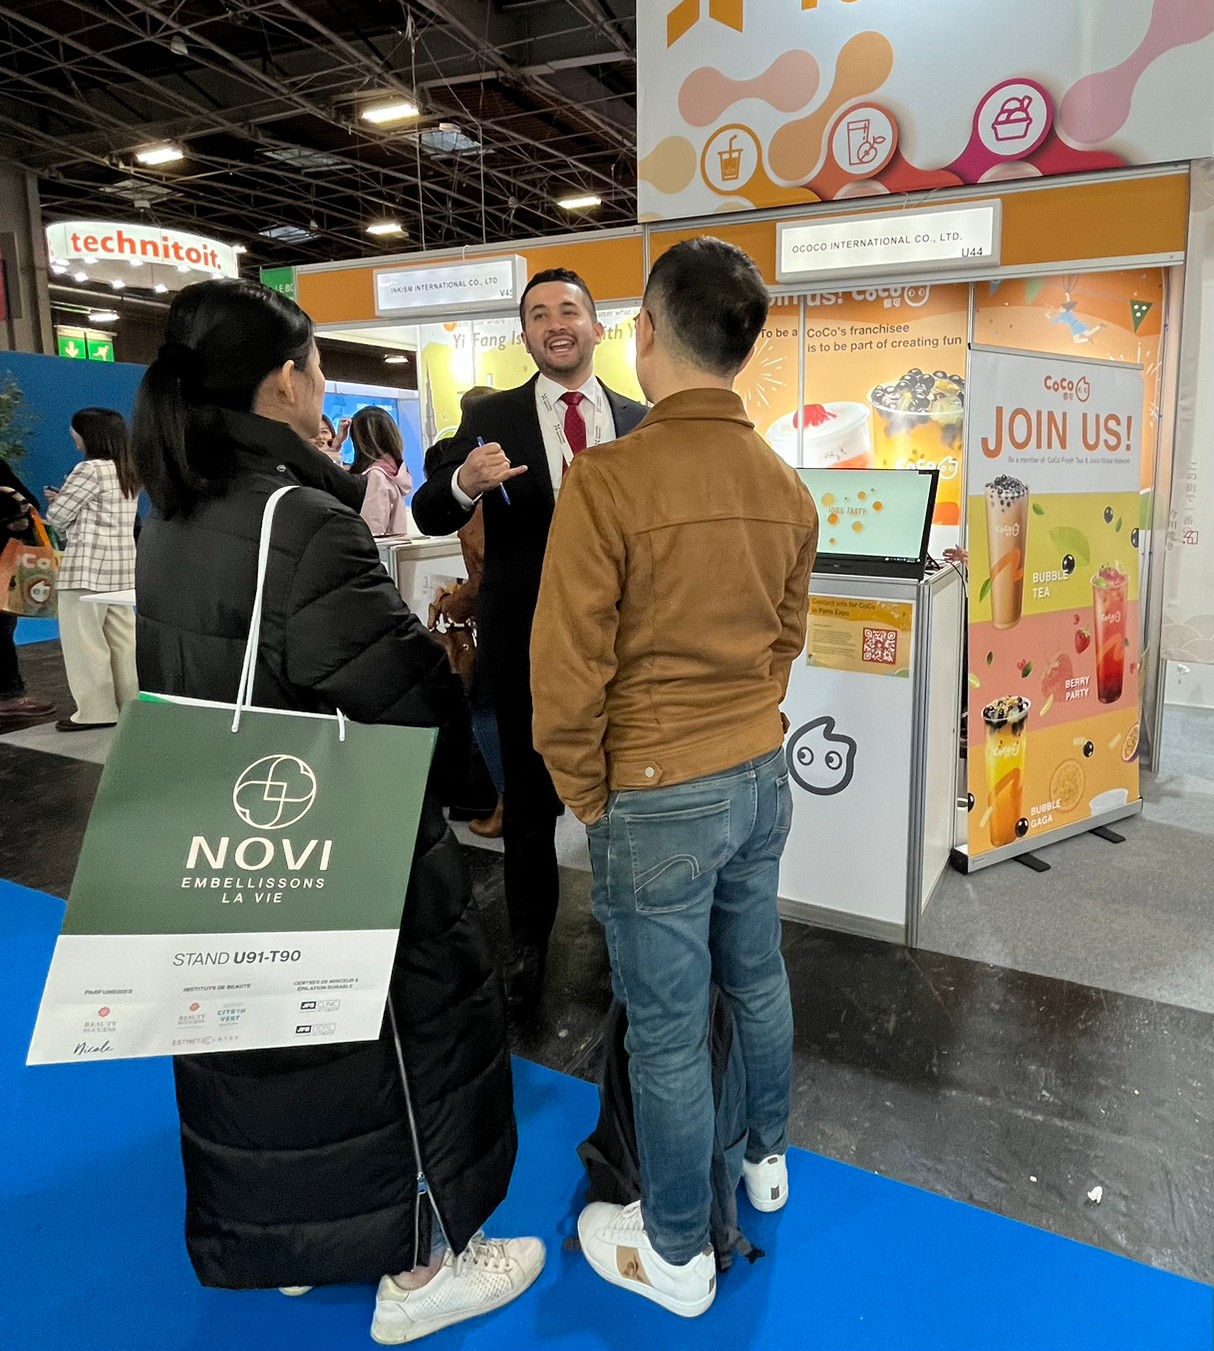 2023 Paris Franchise expo- have great convercation with applicants